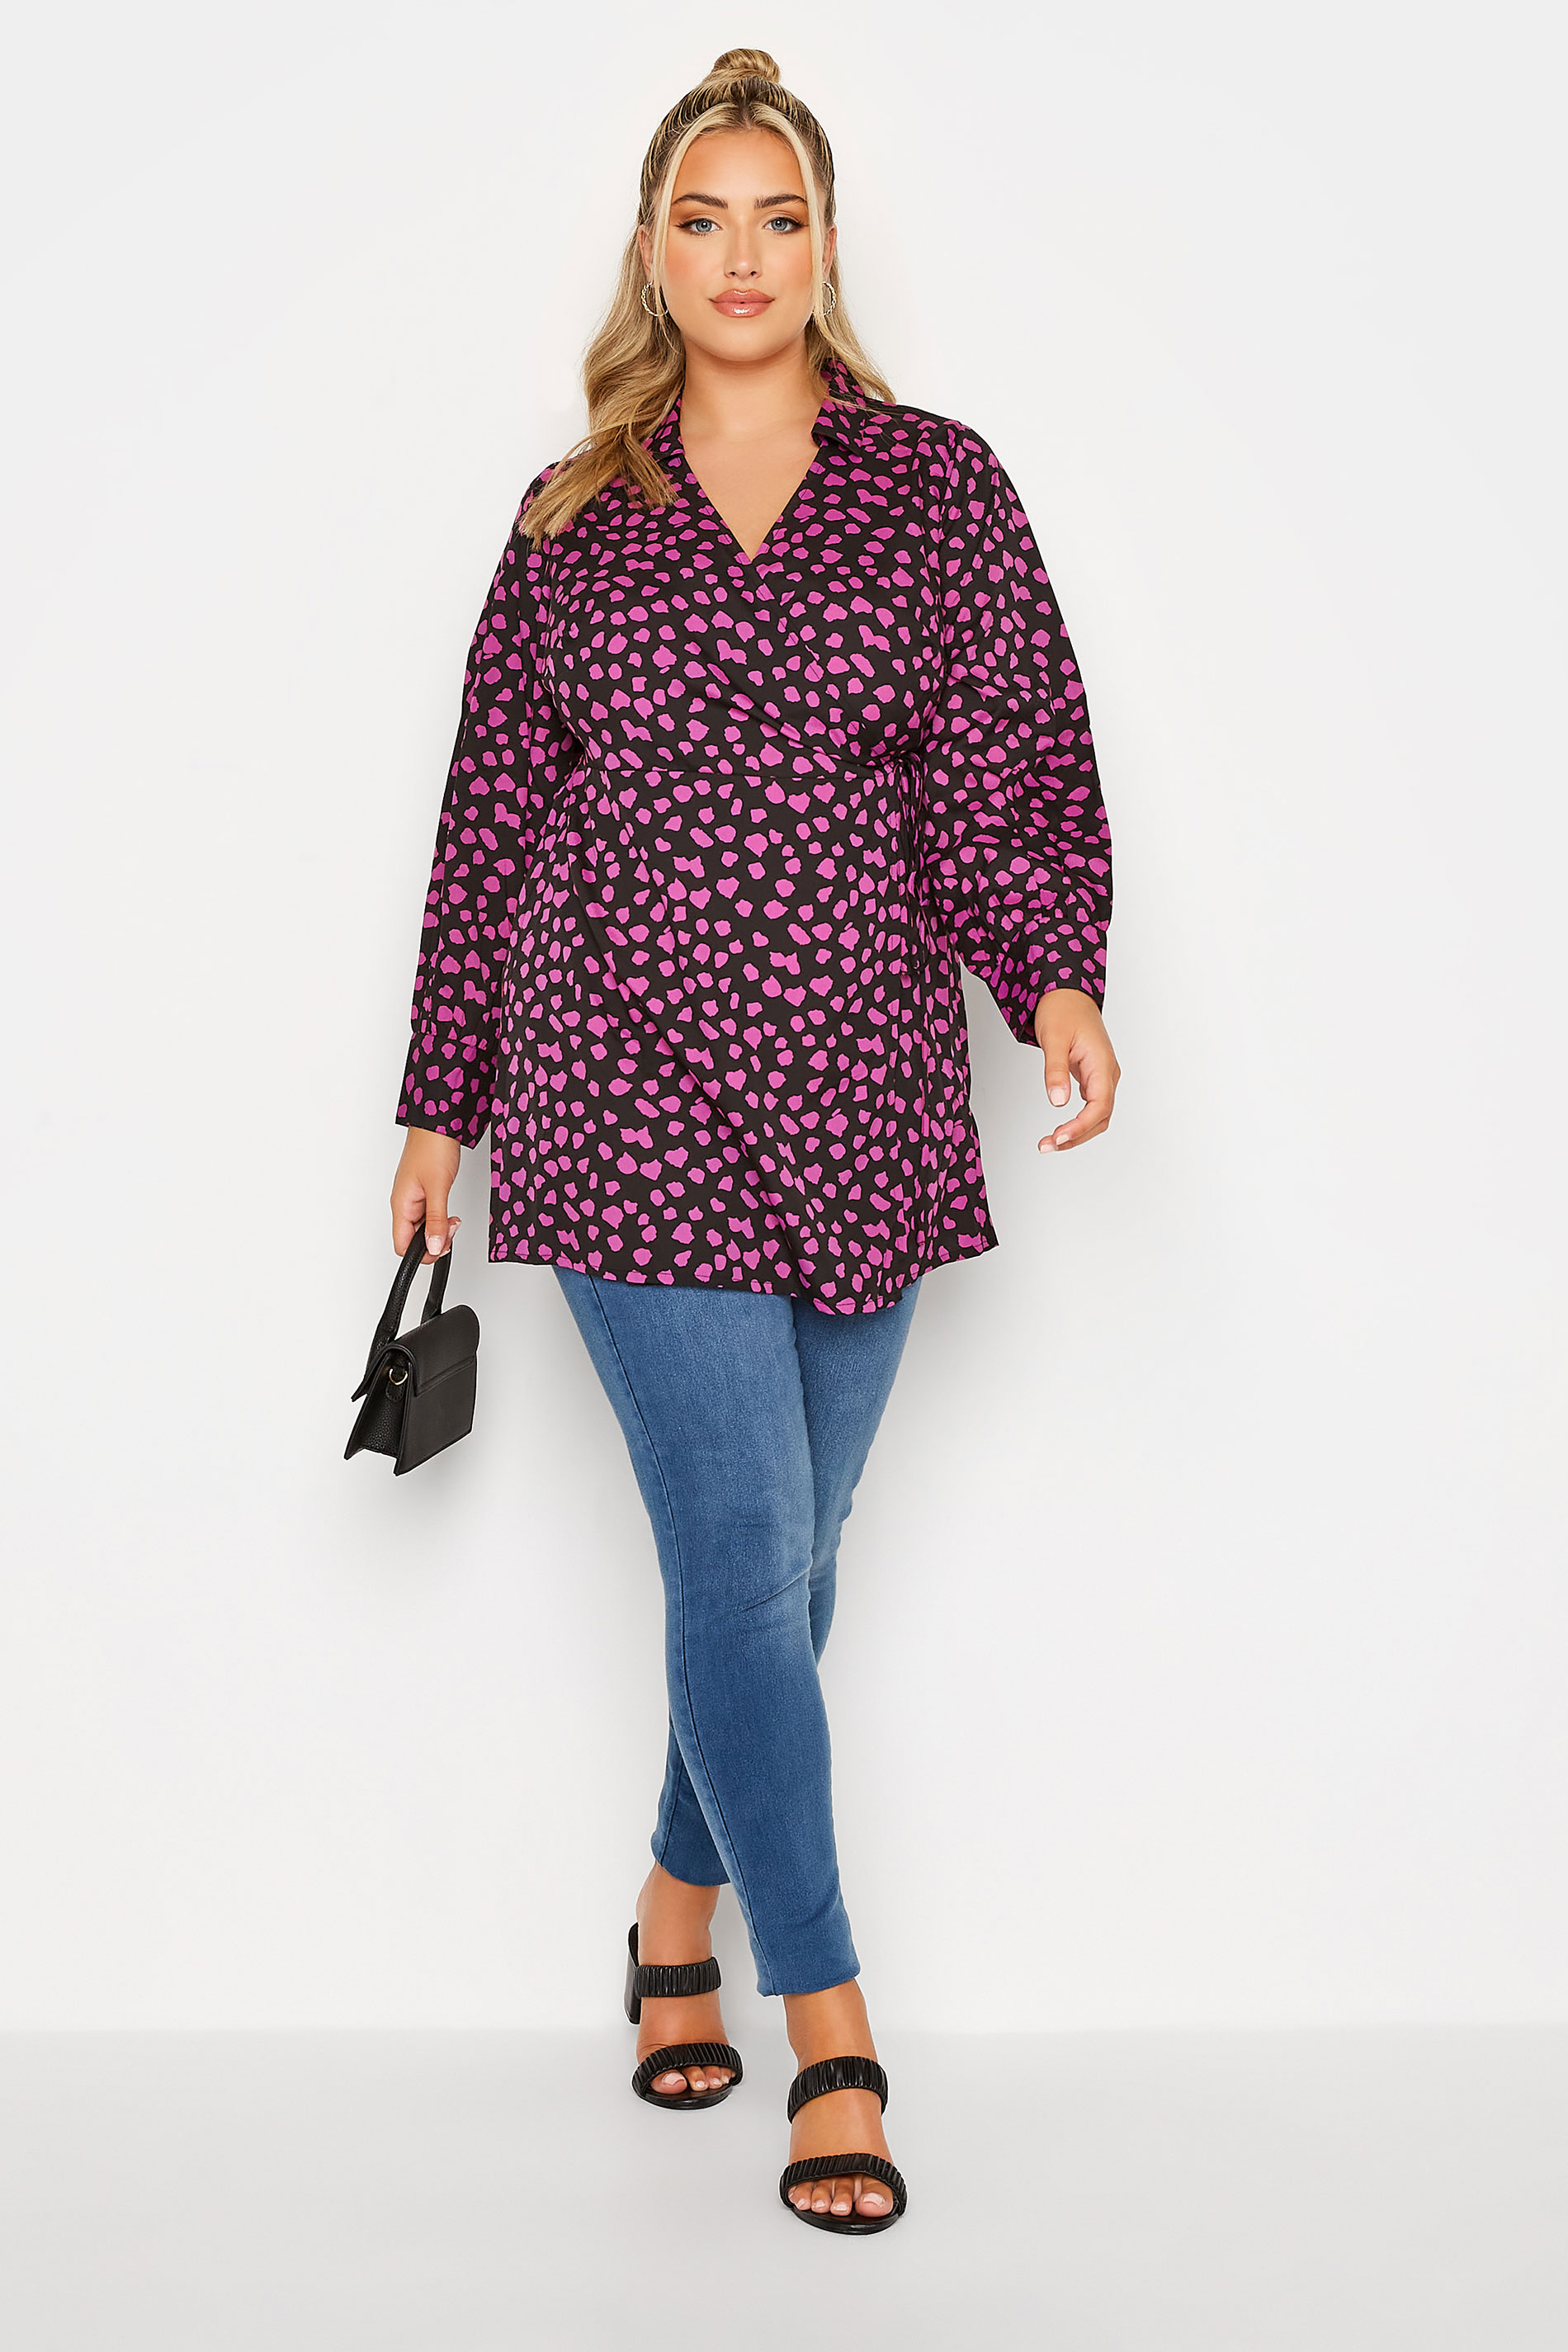 LIMITED COLLECTION Plus Size Black & Pink Dalmatian Print Collar Wrap Top | Yours Clothing 2